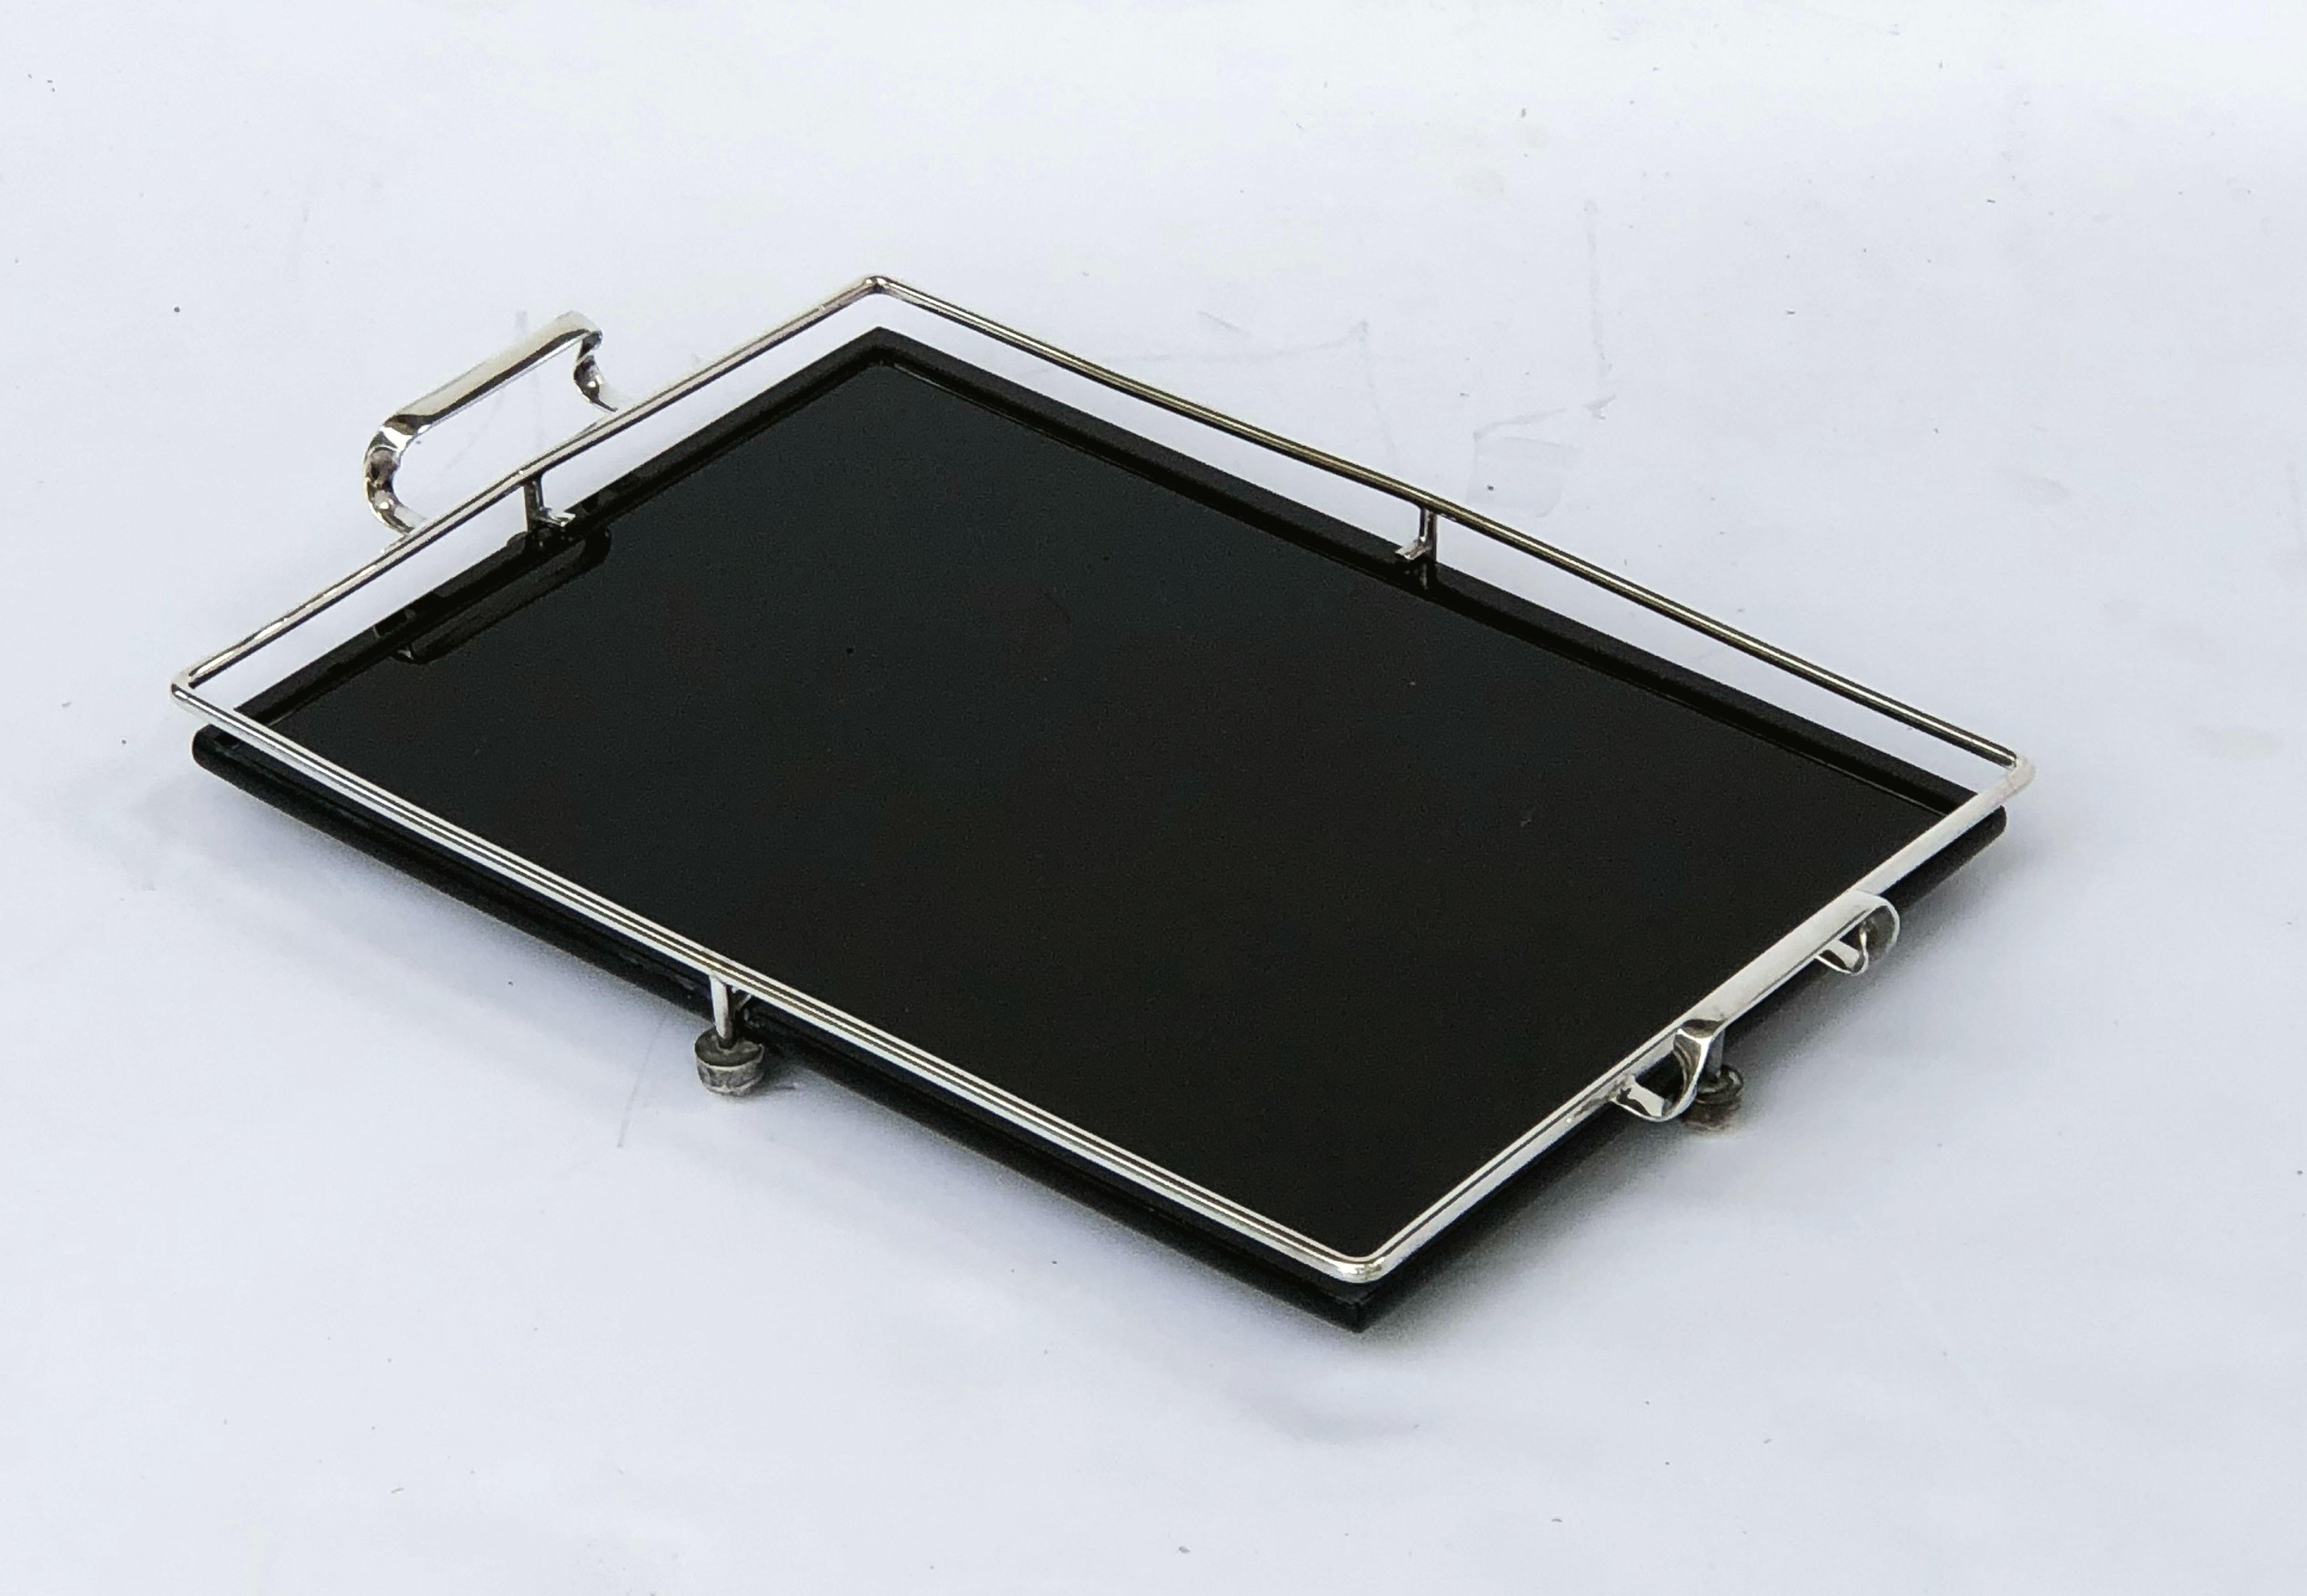 20th Century English Serving Tray of Black Glass and Chrome from the Art Deco Period